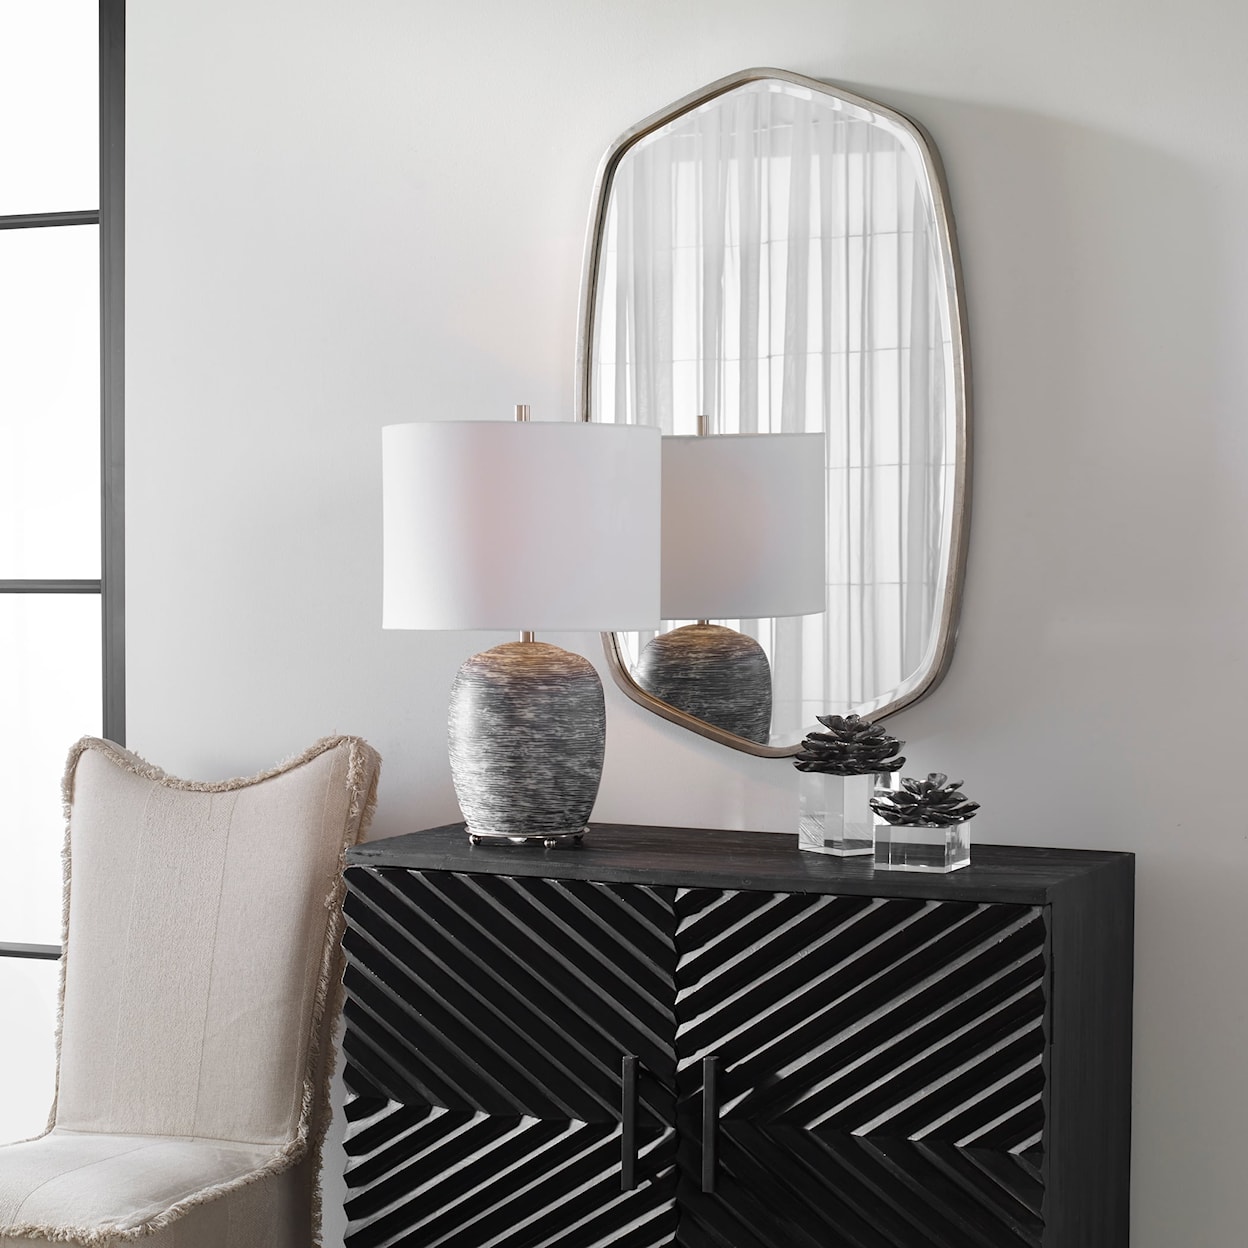 Uttermost Mirrors Duronia Brushed Silver Mirror